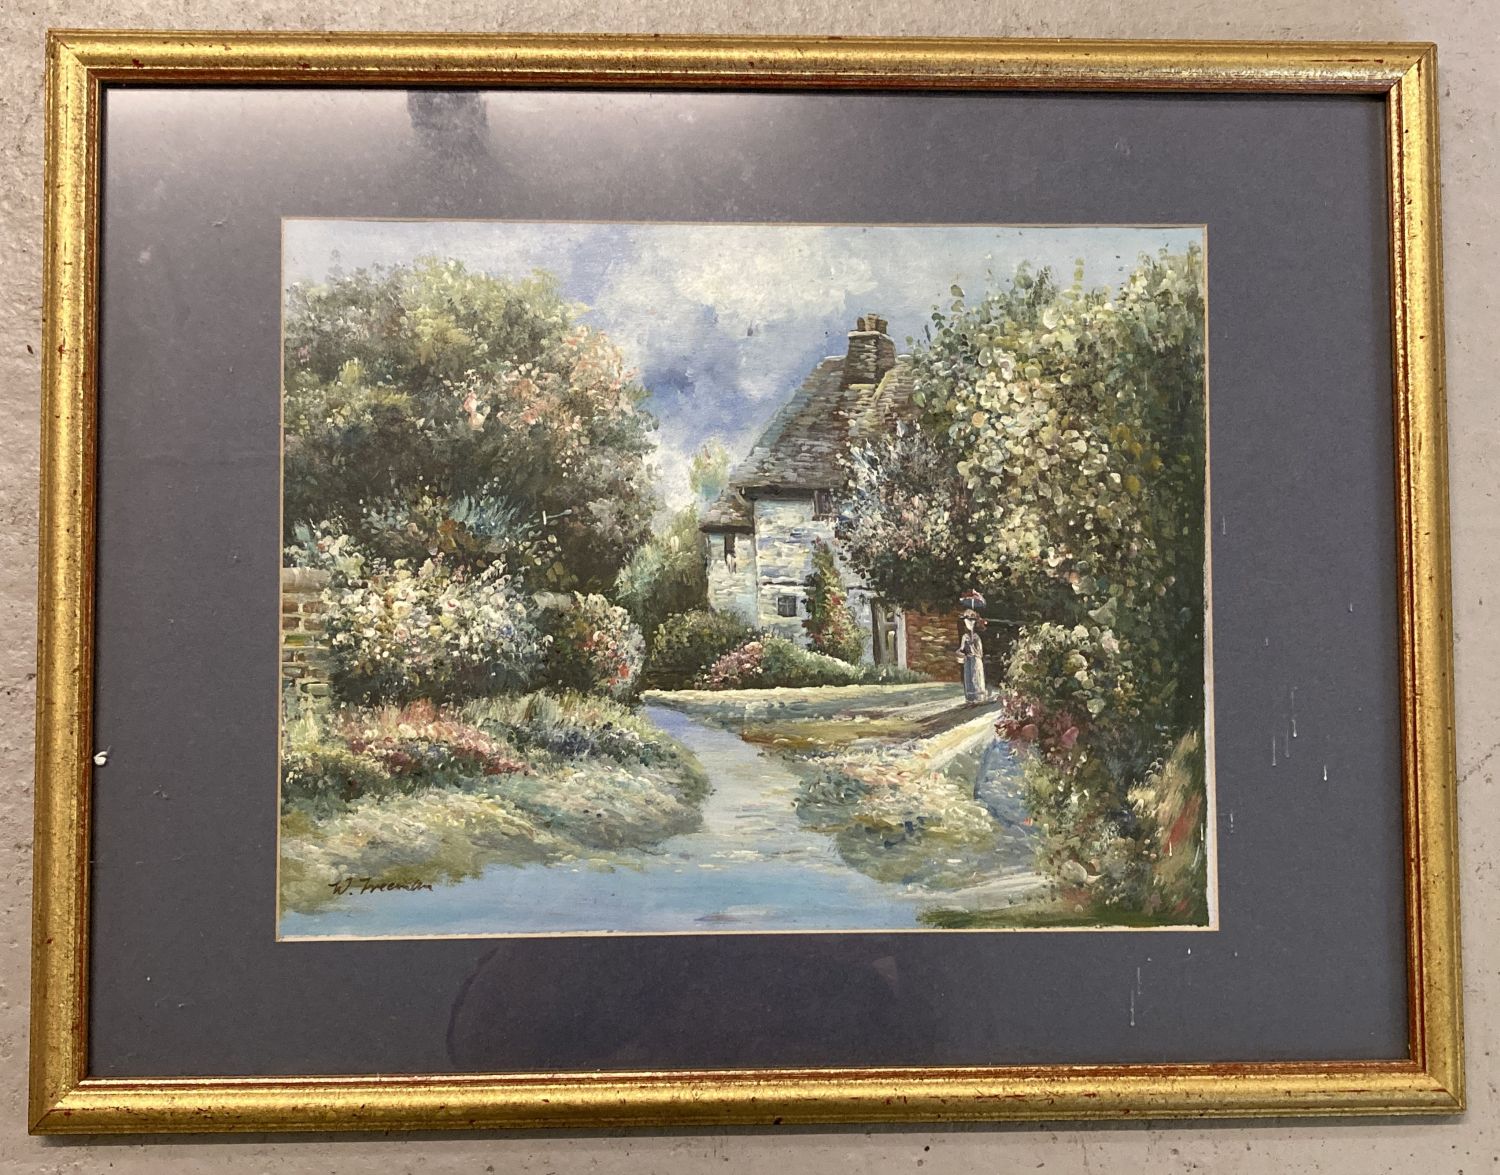 A signed acrylic painting depicting a woman in an English Cottage garden.